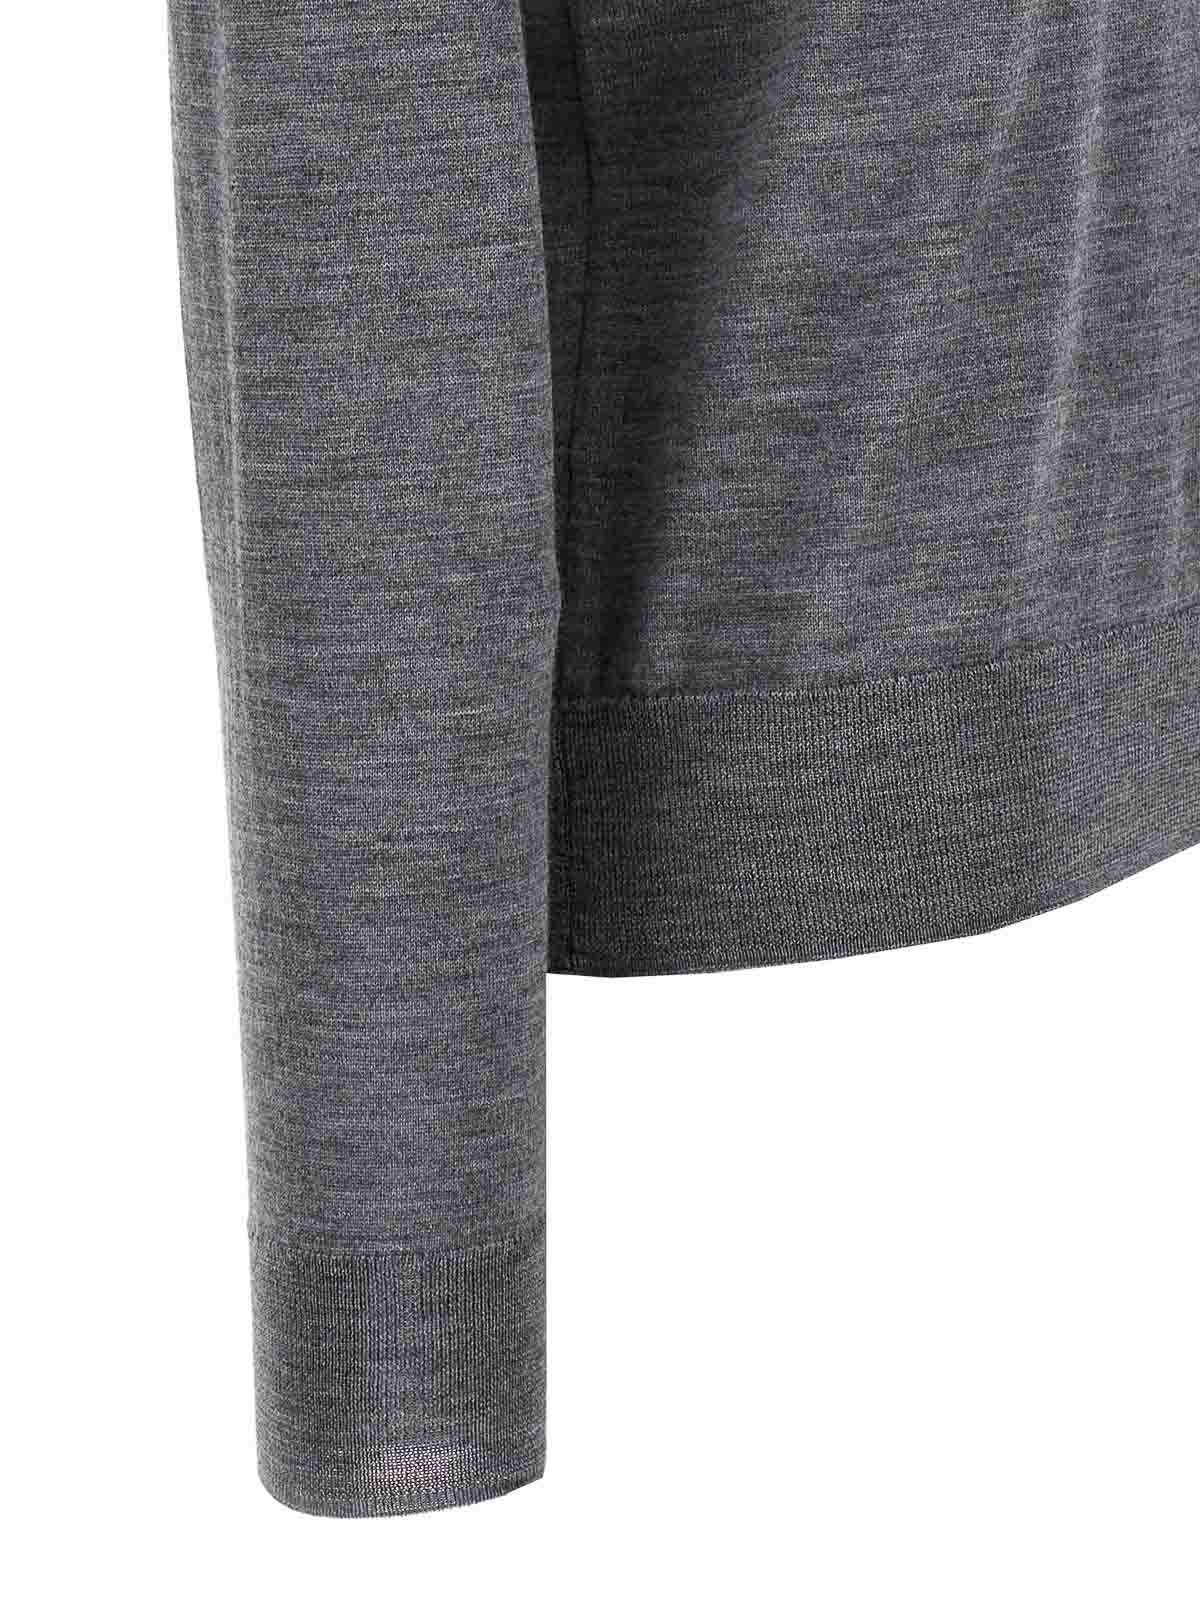 Shop P.a.r.o.s.h V-neck Sweater In Grey